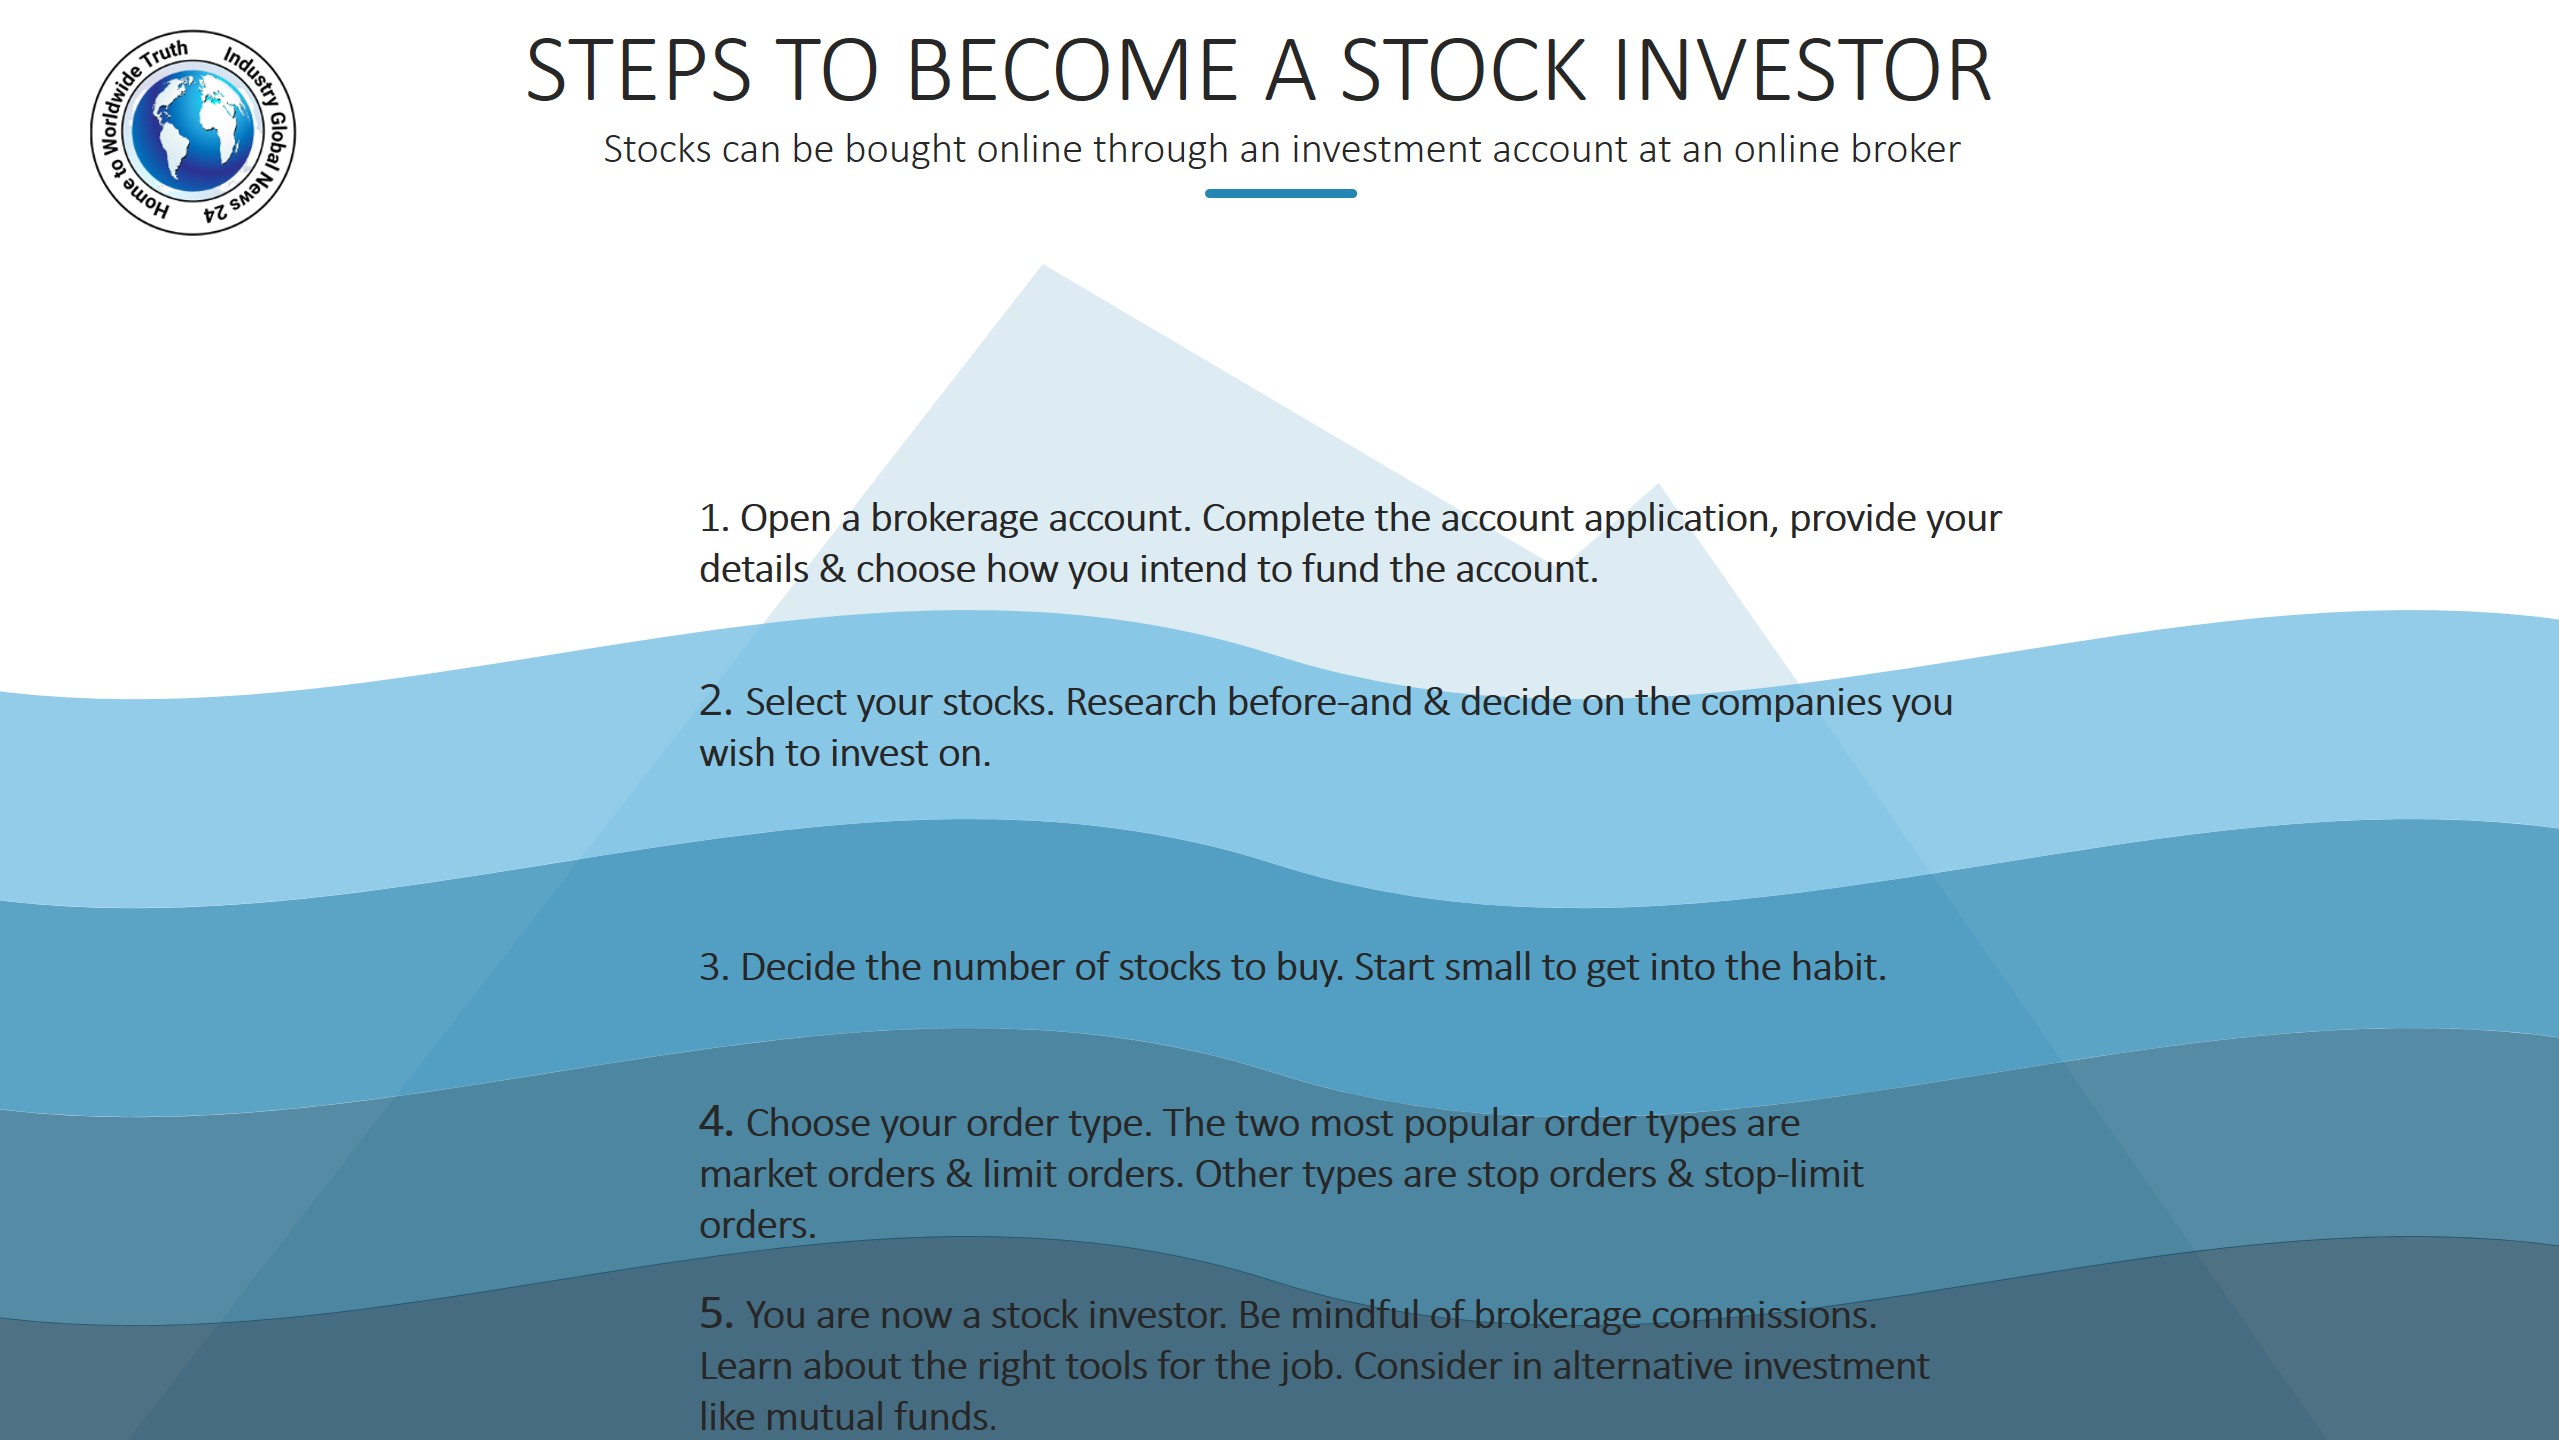 Steps to become a stock investor